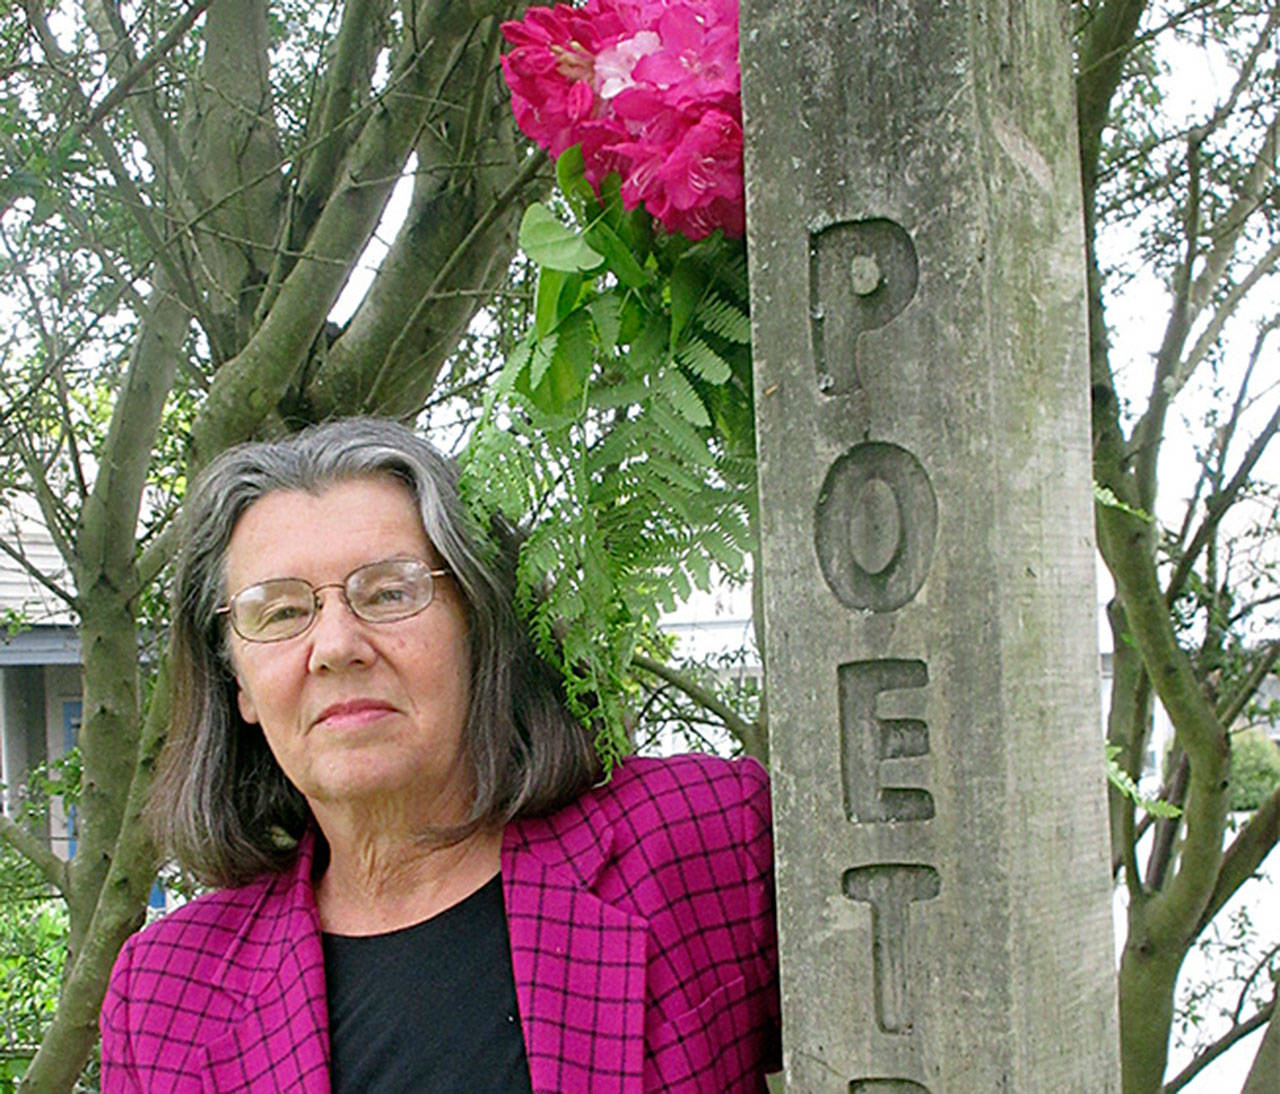 Ann Spiers is a revered figure in Vashon’s vibrant poetry scene. Her work has been published widely (Courtesy Photo).